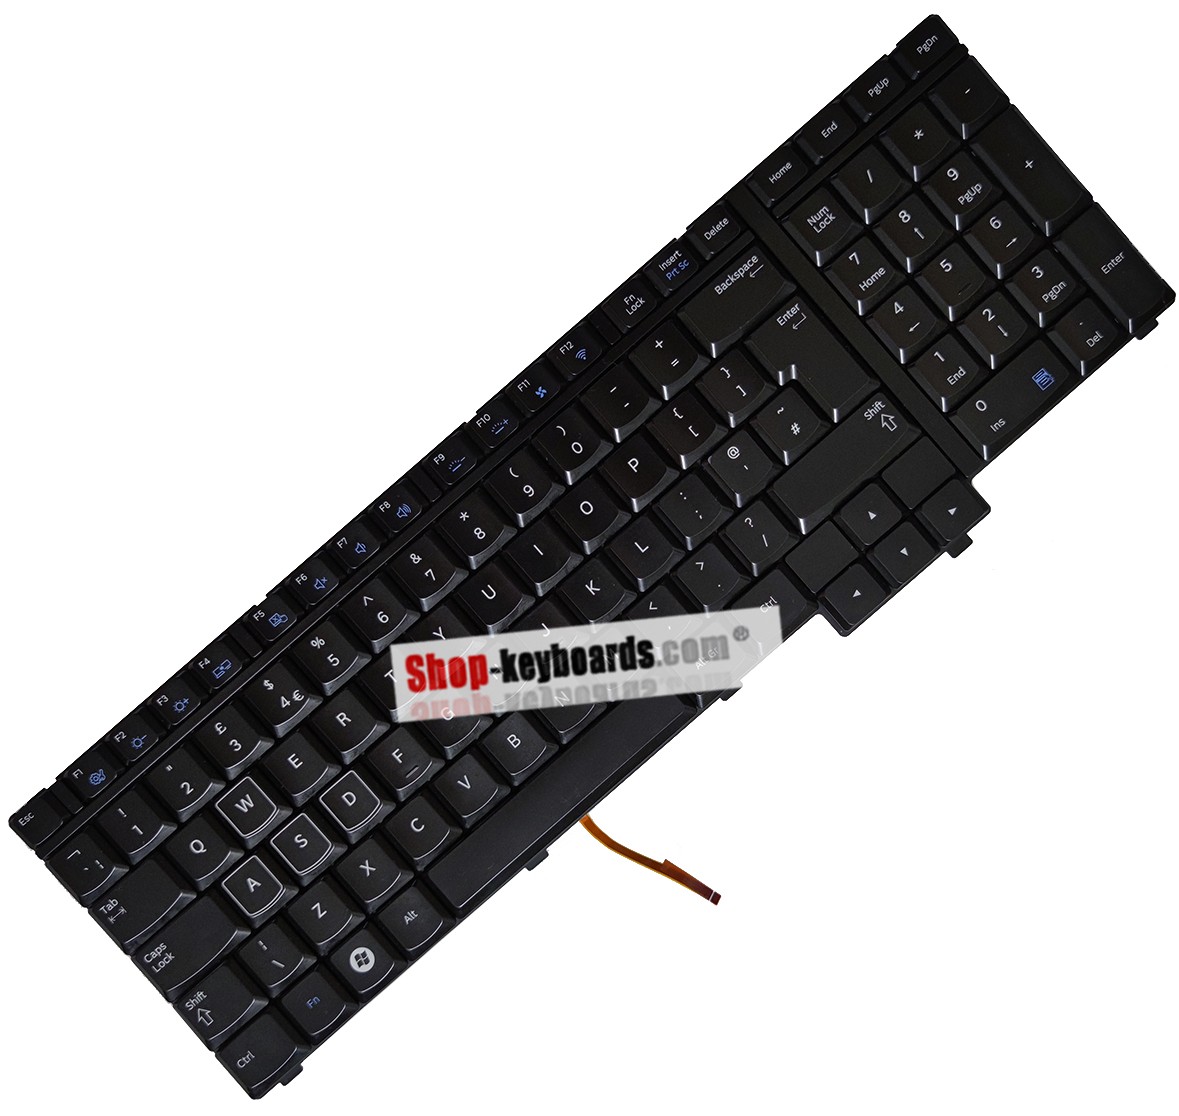 Samsung NP-700G7A Keyboard replacement